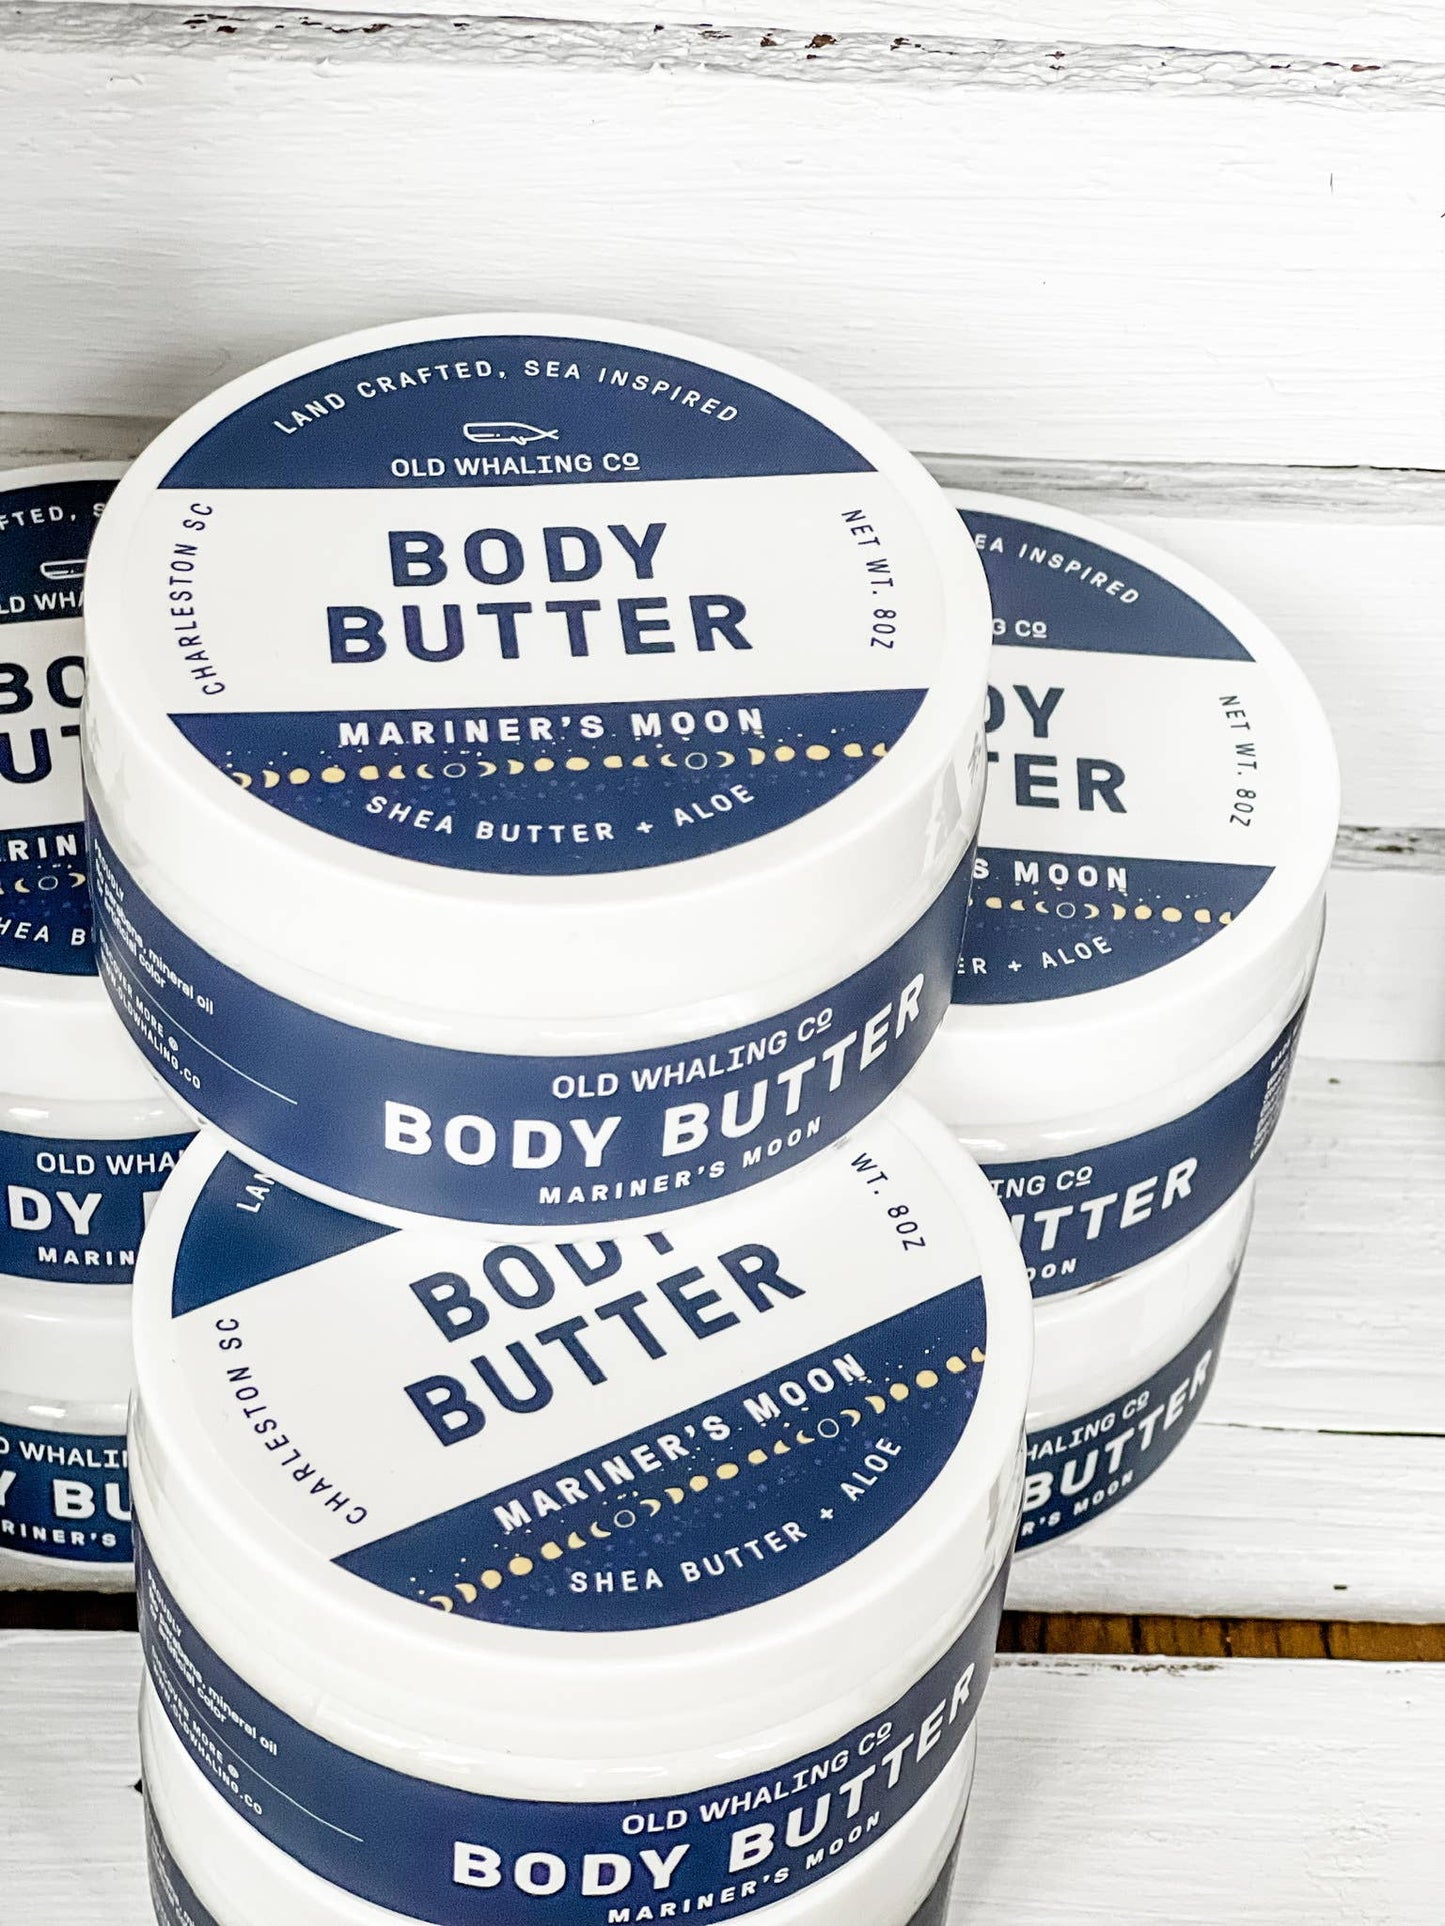 Old Whaling Company - Mariner's Moon Body Butter